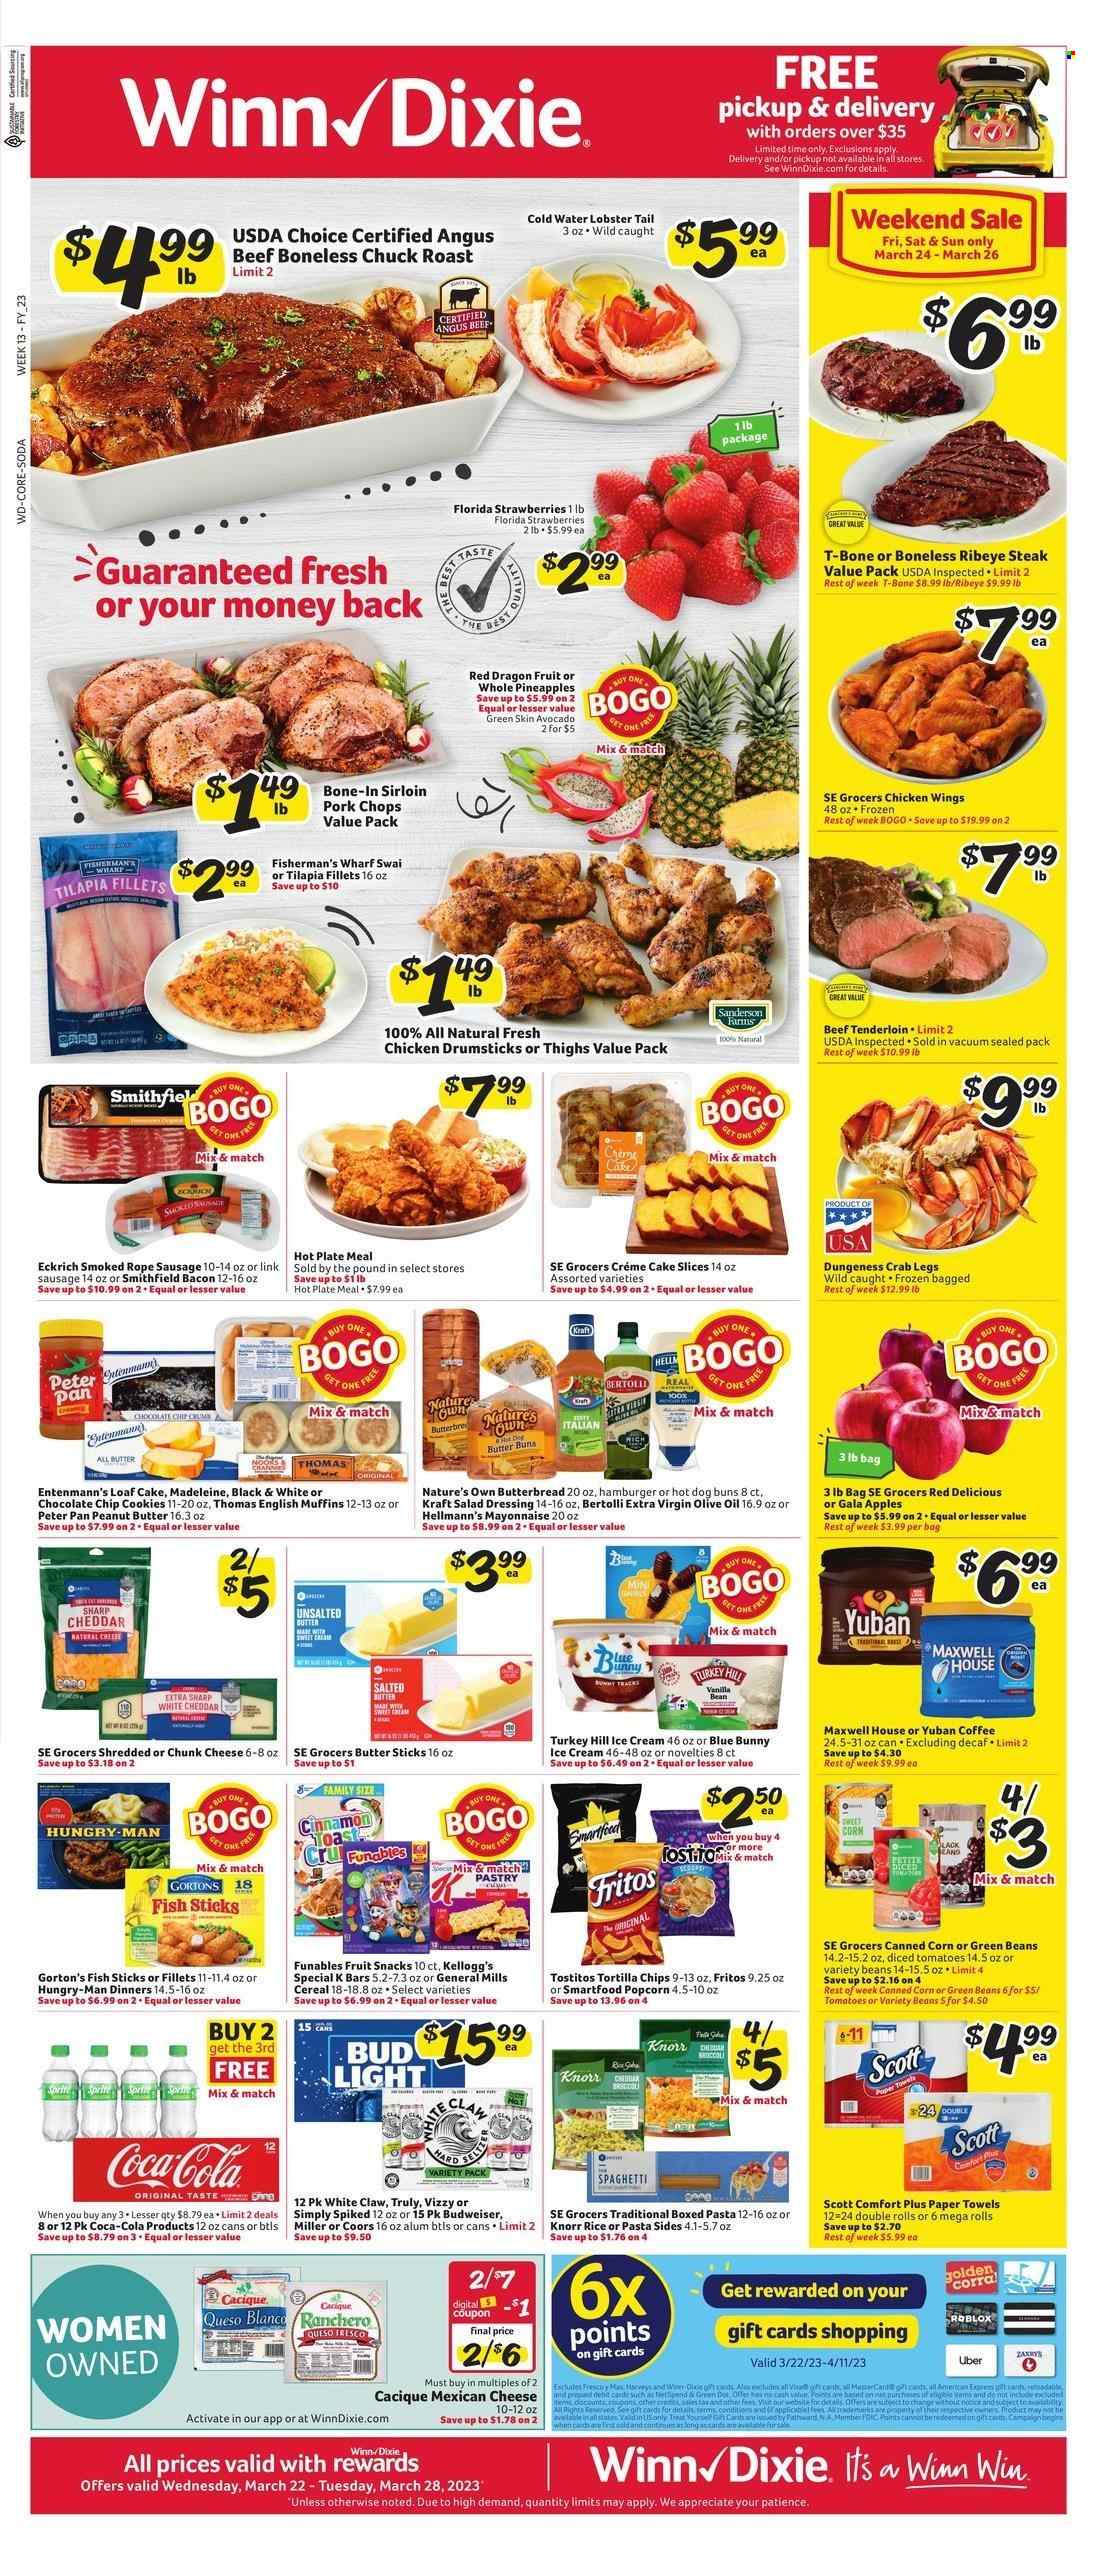 thumbnail - Winn Dixie Flyer - 03/22/2023 - 03/28/2023 - Sales products - english muffins, buns, cream pie, loaf cake, Entenmann's, corn, green beans, apples, avocado, Gala, Red Delicious apples, strawberries, pineapple, dragon fruit, lobster, tilapia, crab legs, crab, fish, lobster tail, fish fingers, Gorton's, fish sticks, spaghetti, Knorr, pasta sides, Kraft®, Bertolli, roast, bacon, sausage, smoked sausage, queso fresco, cheese, chunk cheese, mayonnaise, Hellmann’s, ice cream, Blue Bunny, chicken wings, cookies, chocolate chips, Kellogg's, fruit snack, Fritos, tortilla chips, Smartfood, popcorn, Tostitos, diced tomatoes, cereals, cinnamon, salad dressing, dressing, extra virgin olive oil, olive oil, oil, peanut butter, Coca-Cola, soda, water, Maxwell House, coffee, White Claw, TRULY, beer, Miller, chicken drumsticks, chicken, beef meat, beef steak, t-bone steak, steak, beef tenderloin, chuck roast, ribeye steak, pork chops, pork meat, pants, Scott, kitchen towels, paper towels, plate, pan, Nature's Own, Budweiser, Coors. Page 1.